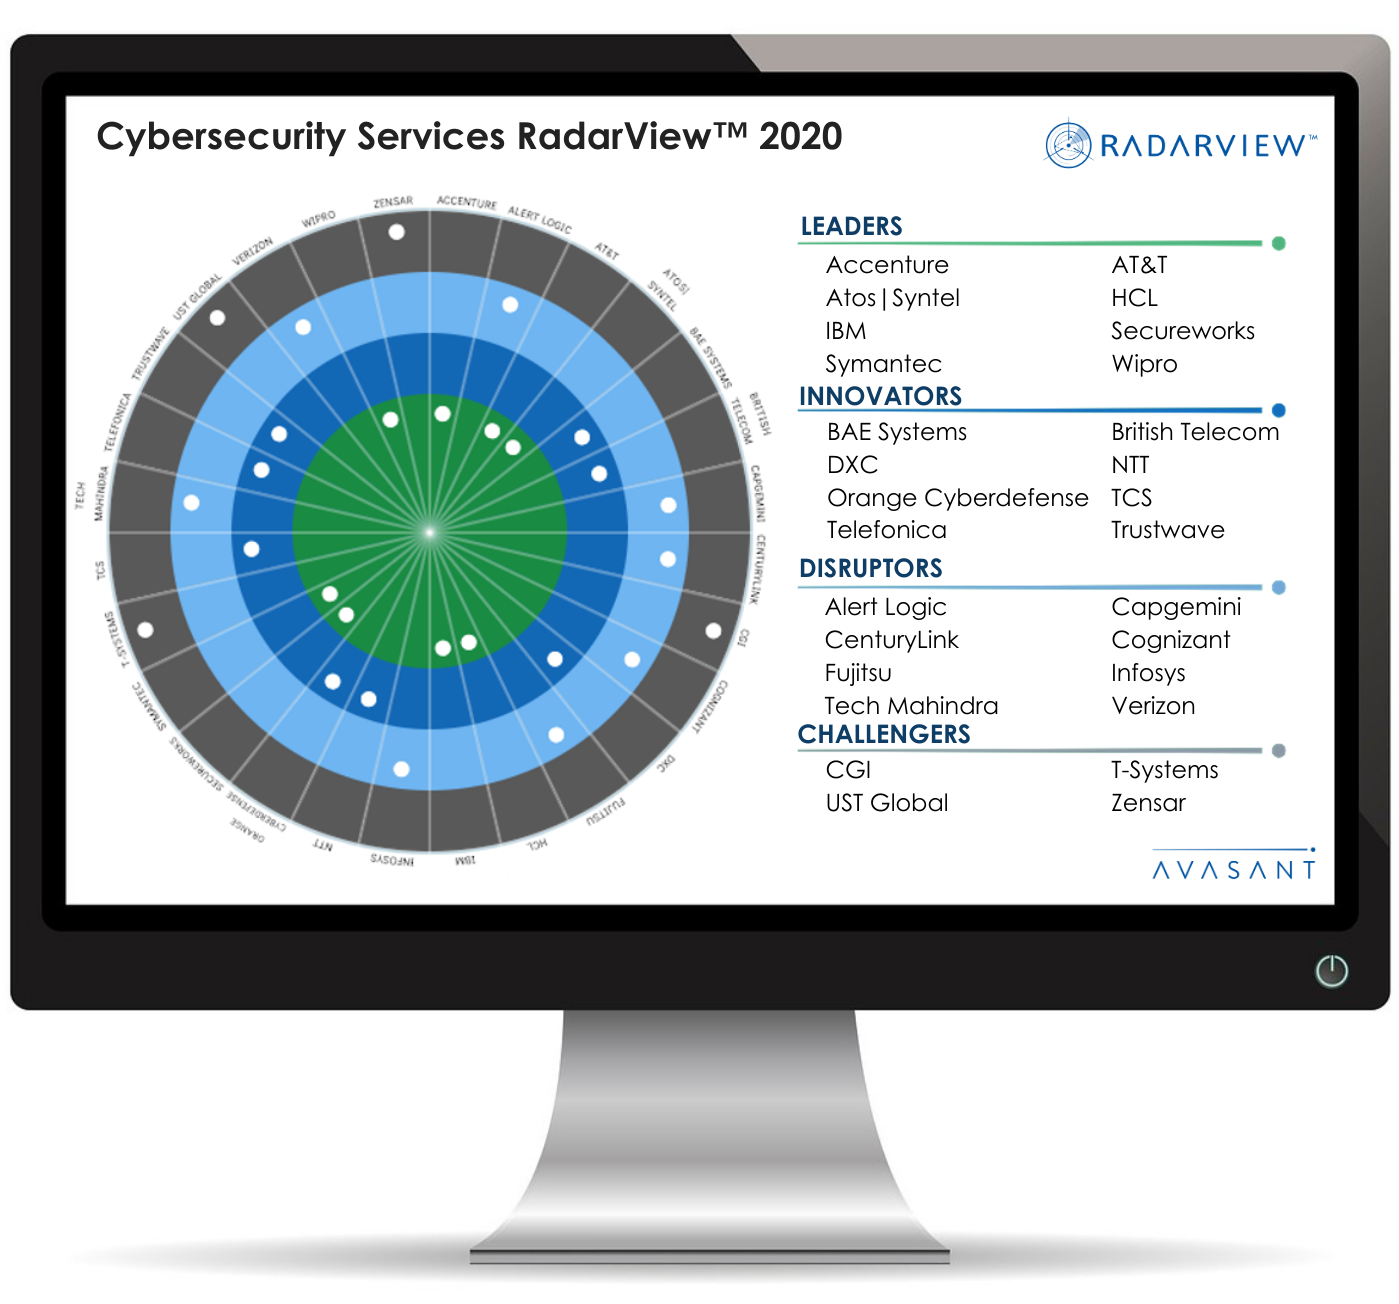 Cybersecurity RV 1 1 - Cybersecurity Services RadarView™ 2020 - Cognizant